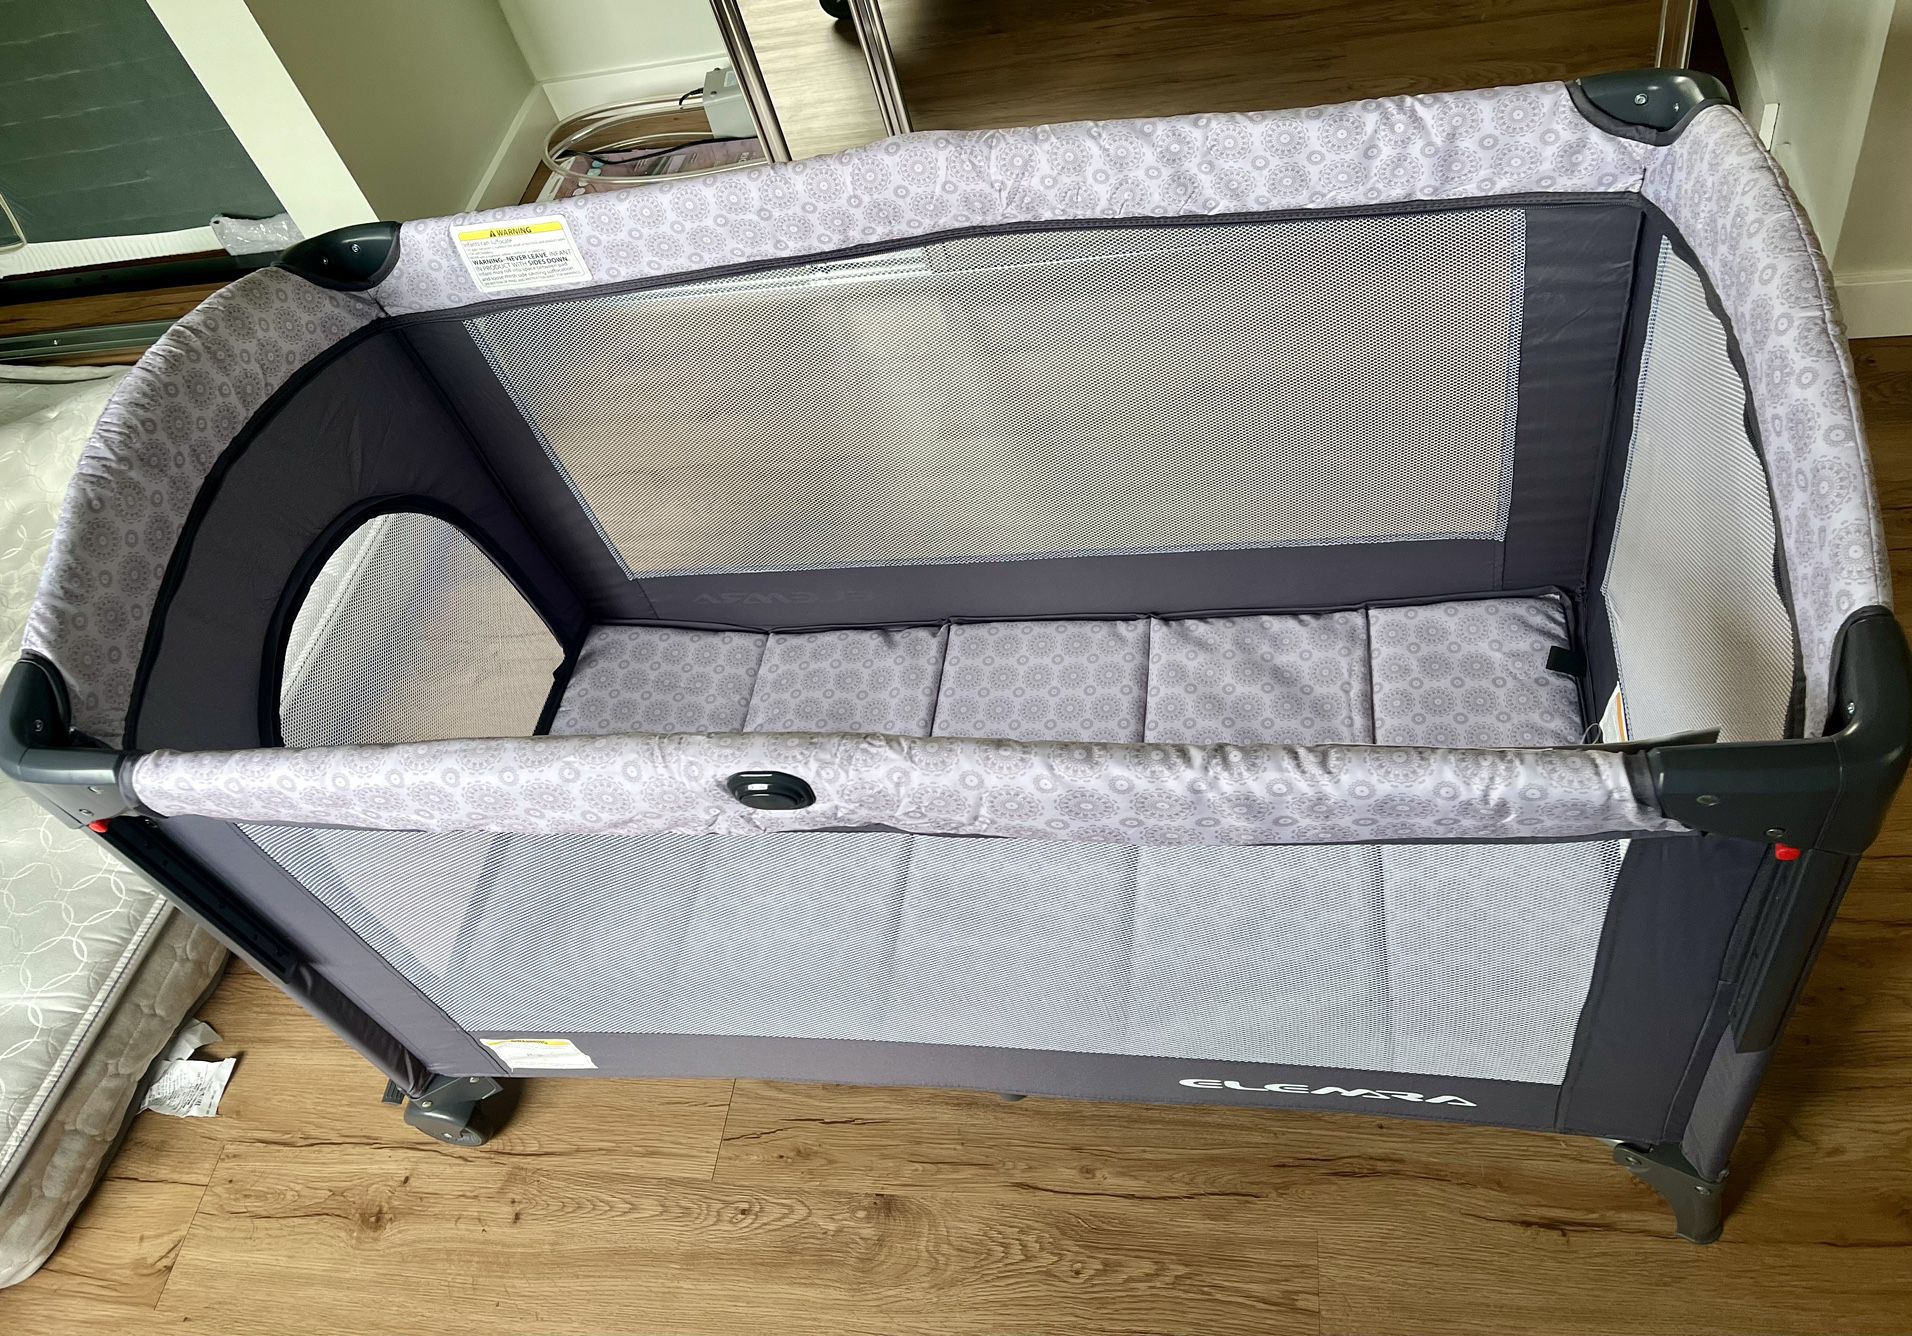 4 in 1 Crib / Playpen / Changing Table / Bassinet [Brand NEW]